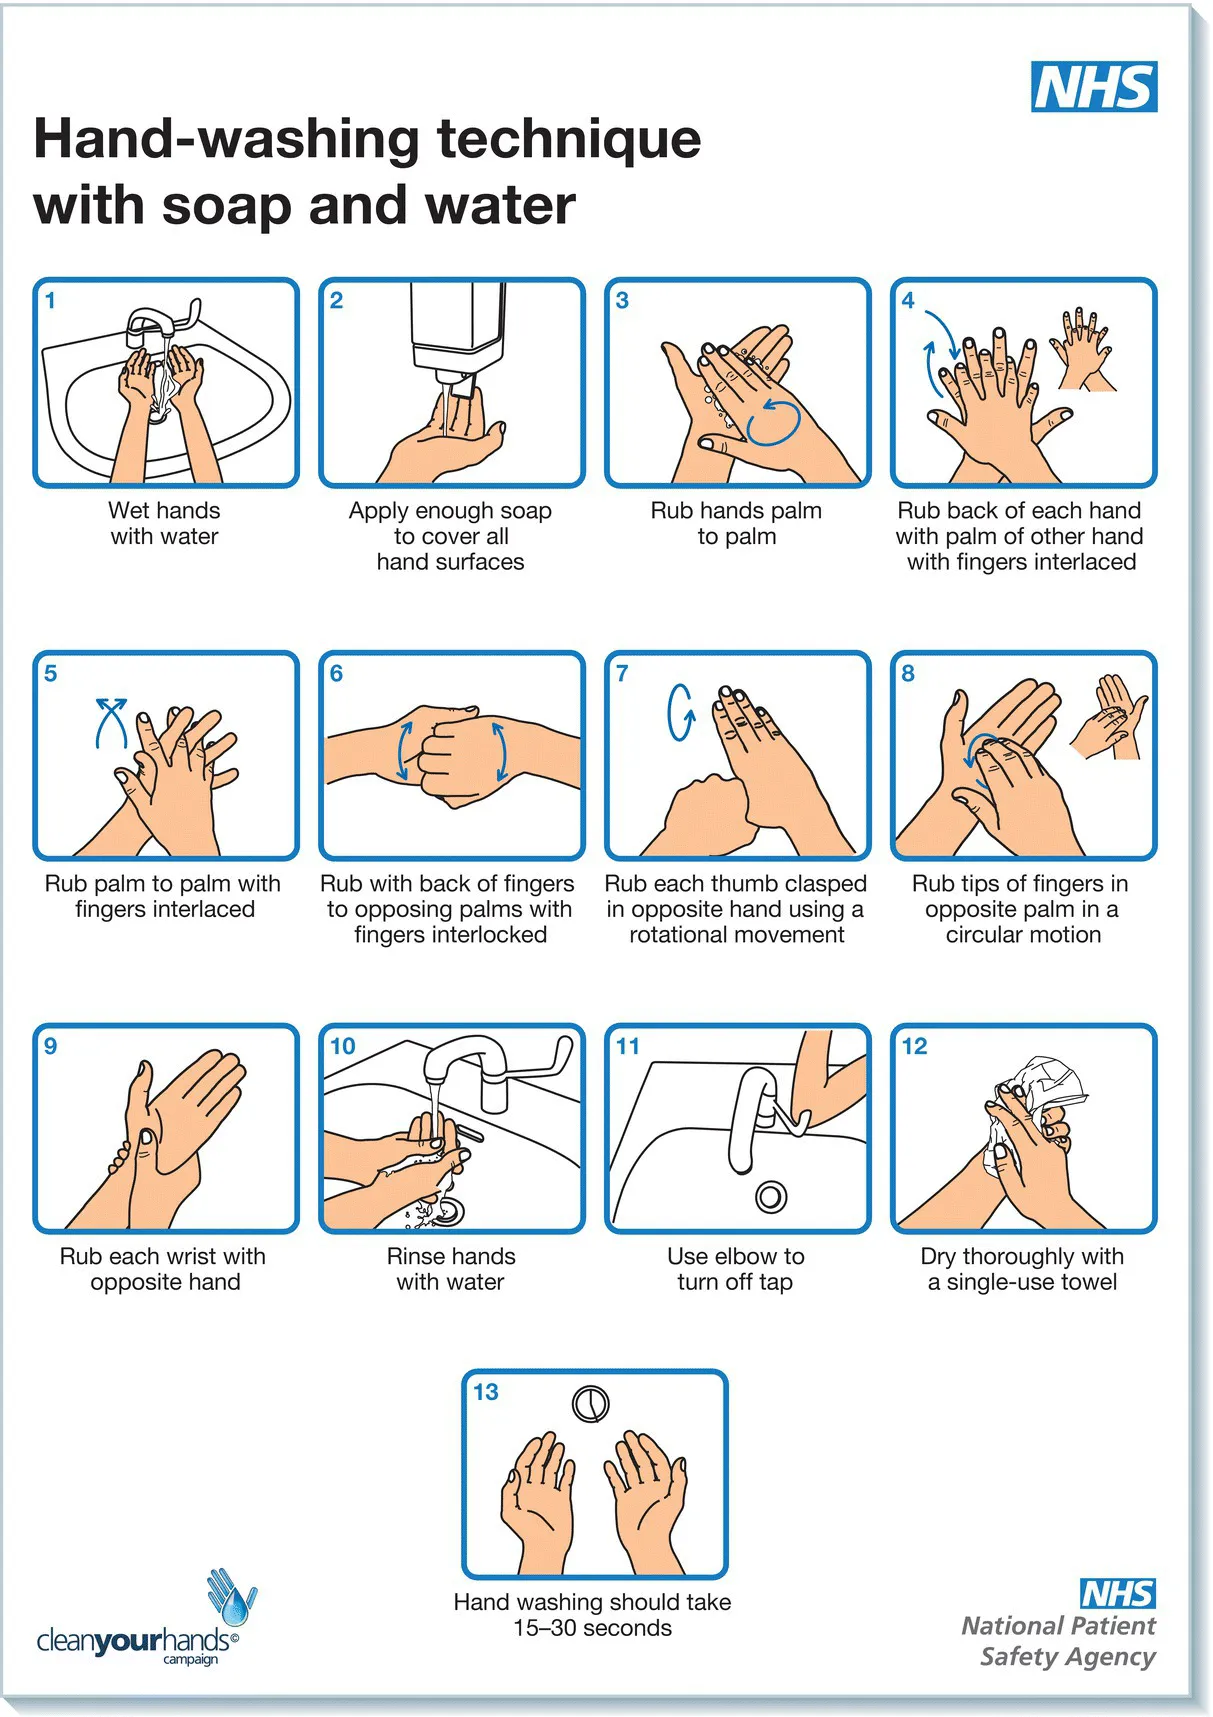 Infographic displaying the 13 steps of the hand-washing technique using soap and water.